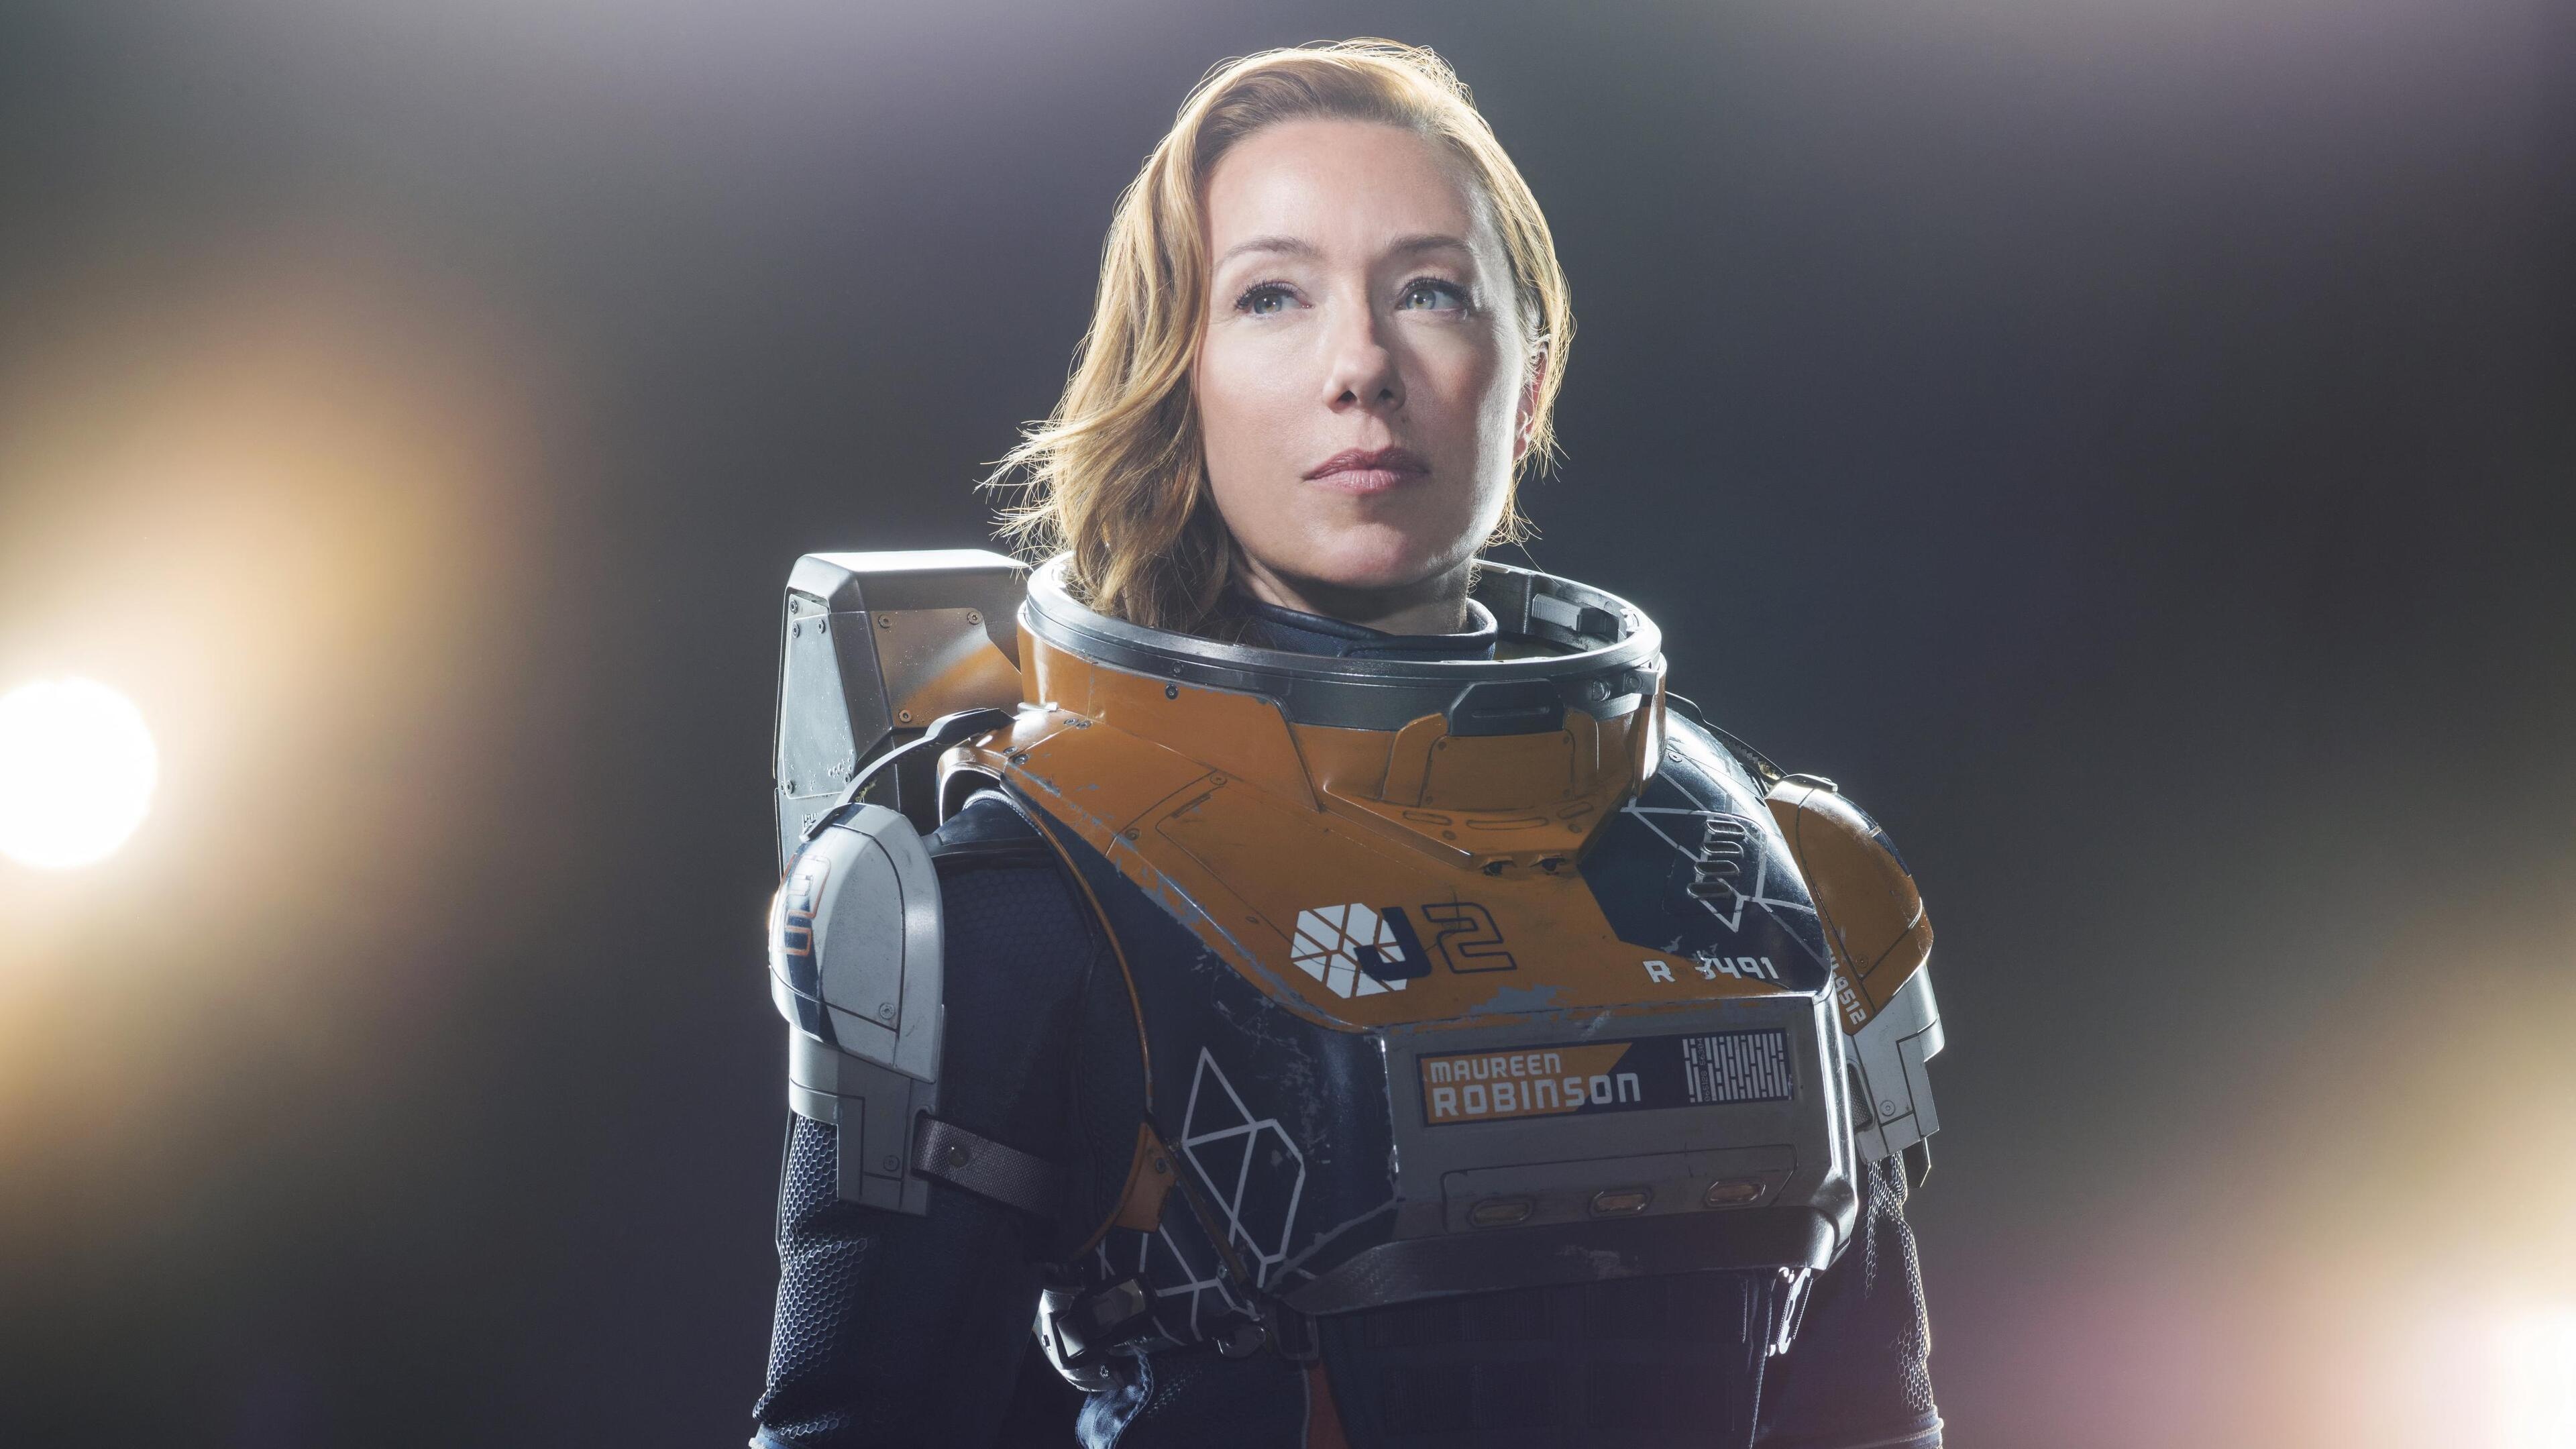 Lost In Space Series, Molly Parker as Maureen Robinson, Stunning 4K visuals, Captivating characters, 3840x2160 4K Desktop